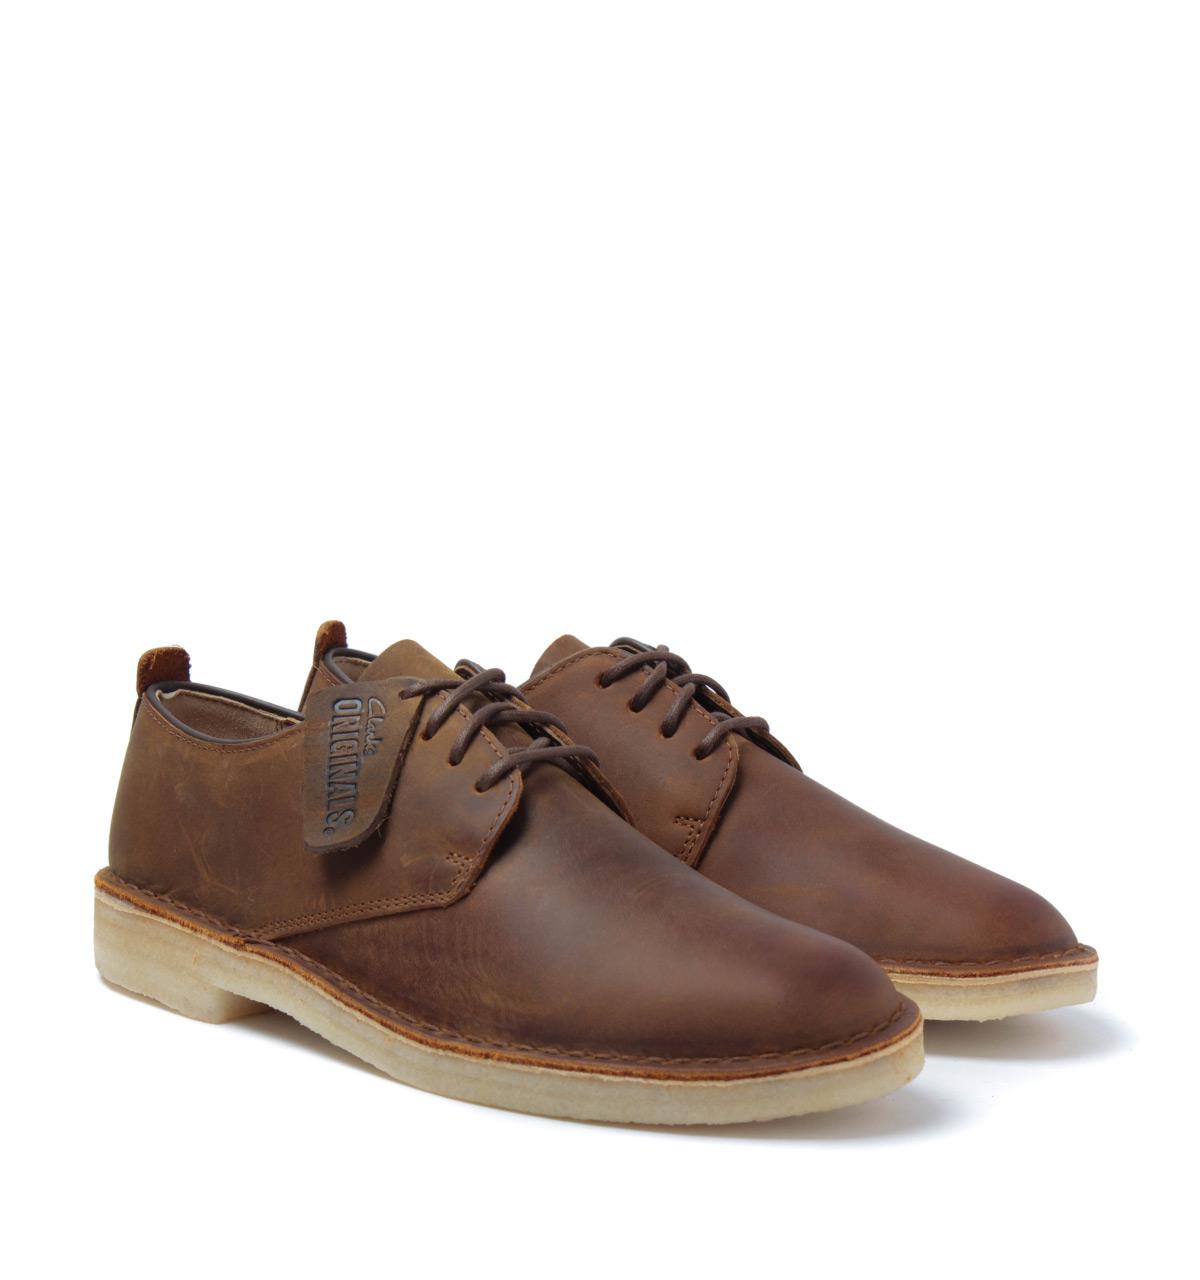 Clarks Desert London Beeswax Men's Leather Lace Up Shoe 38240 